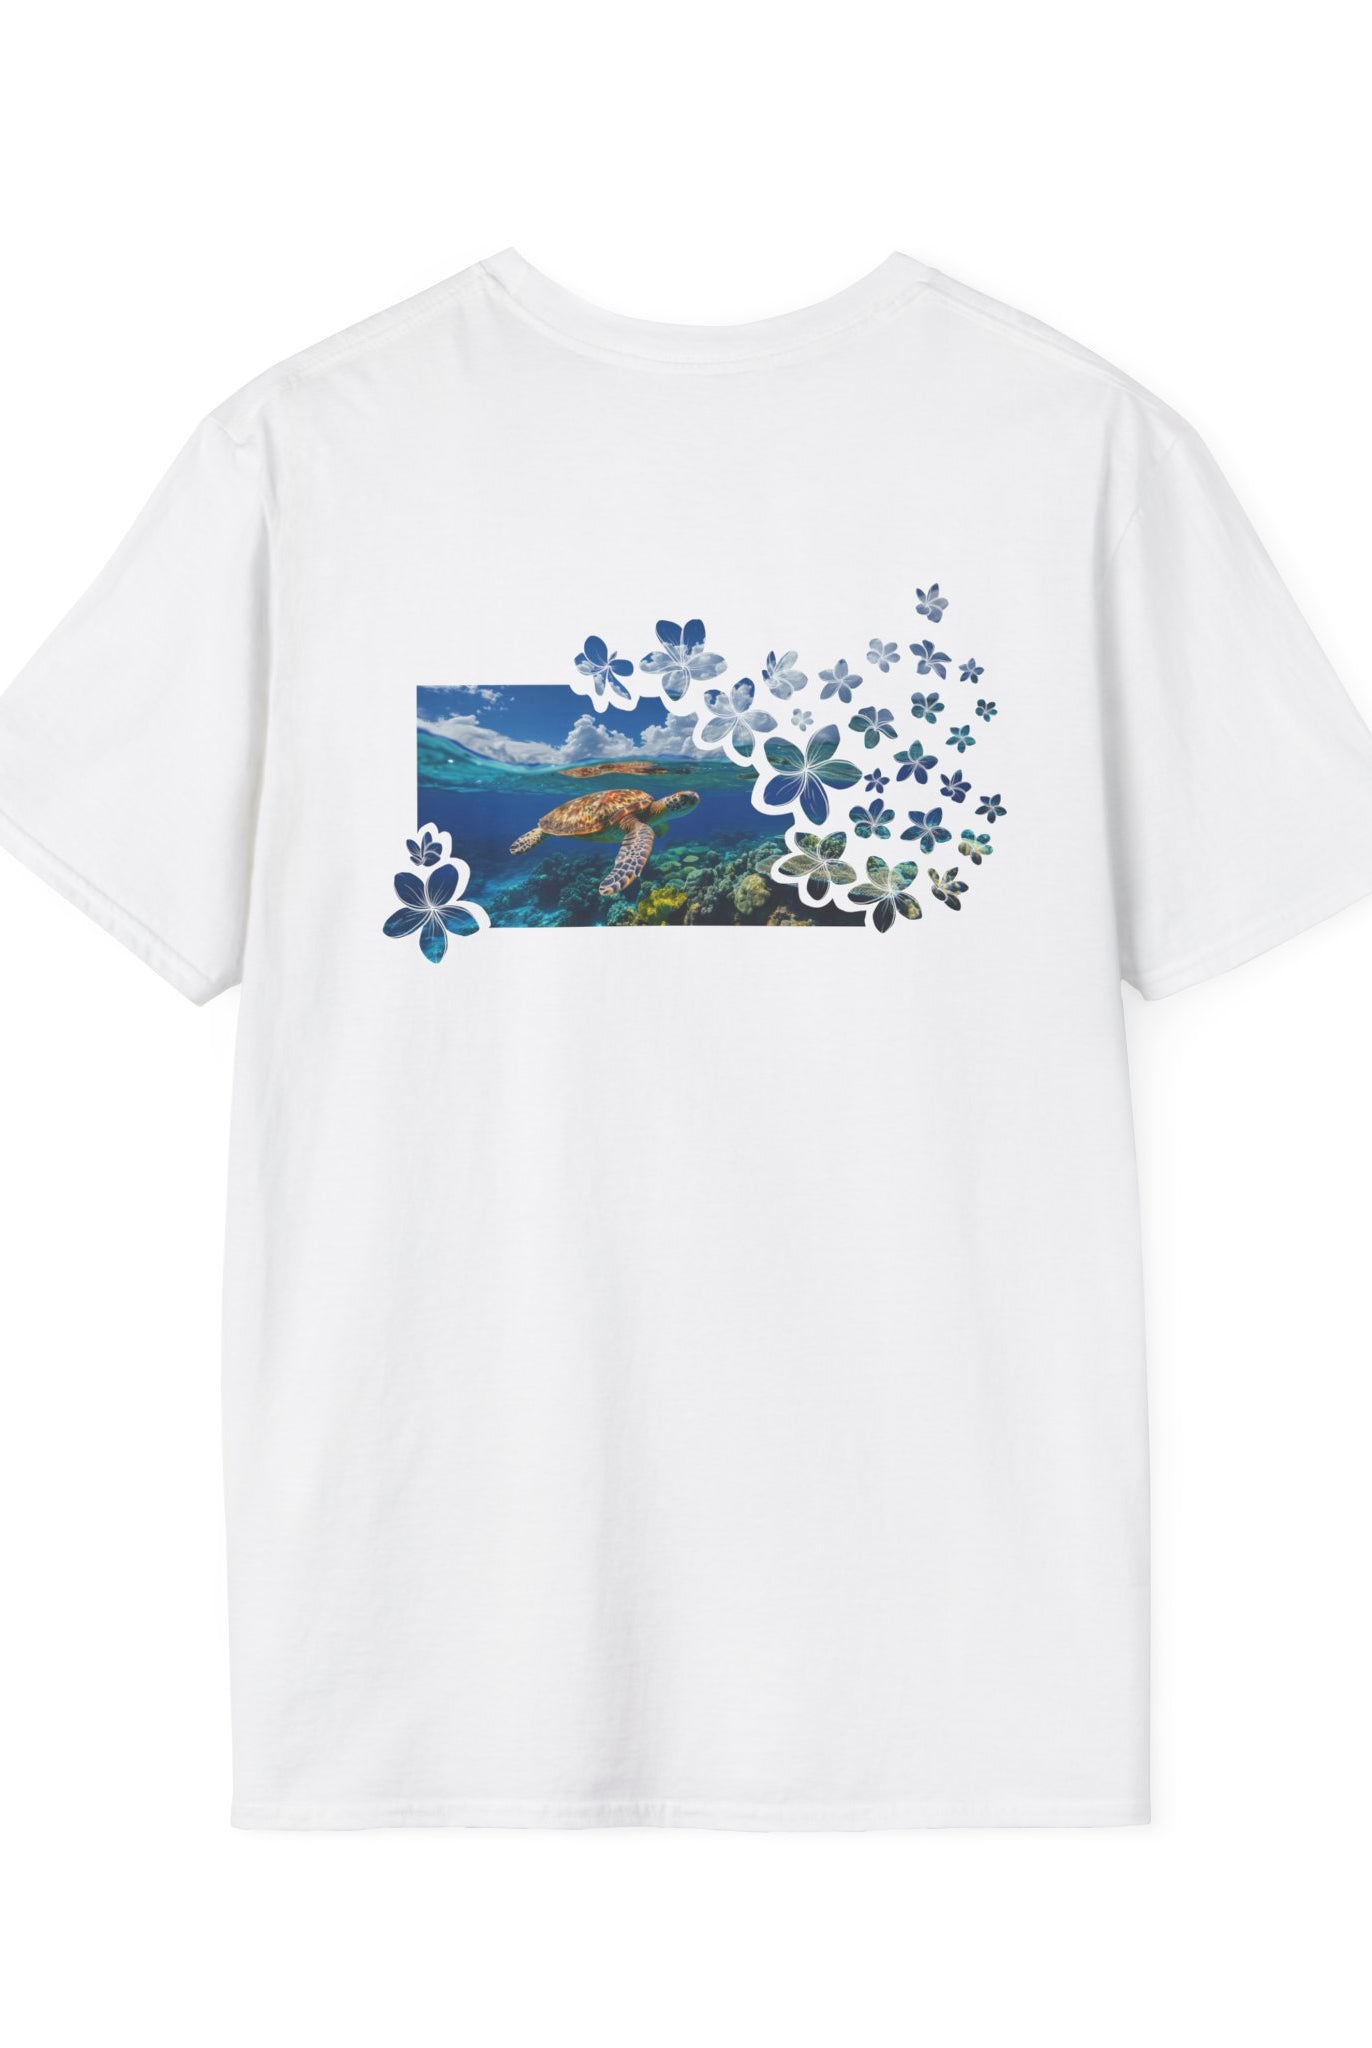 Turtle's Tranquility Plumeria Paradise Soft style Tee - The Local Banyan